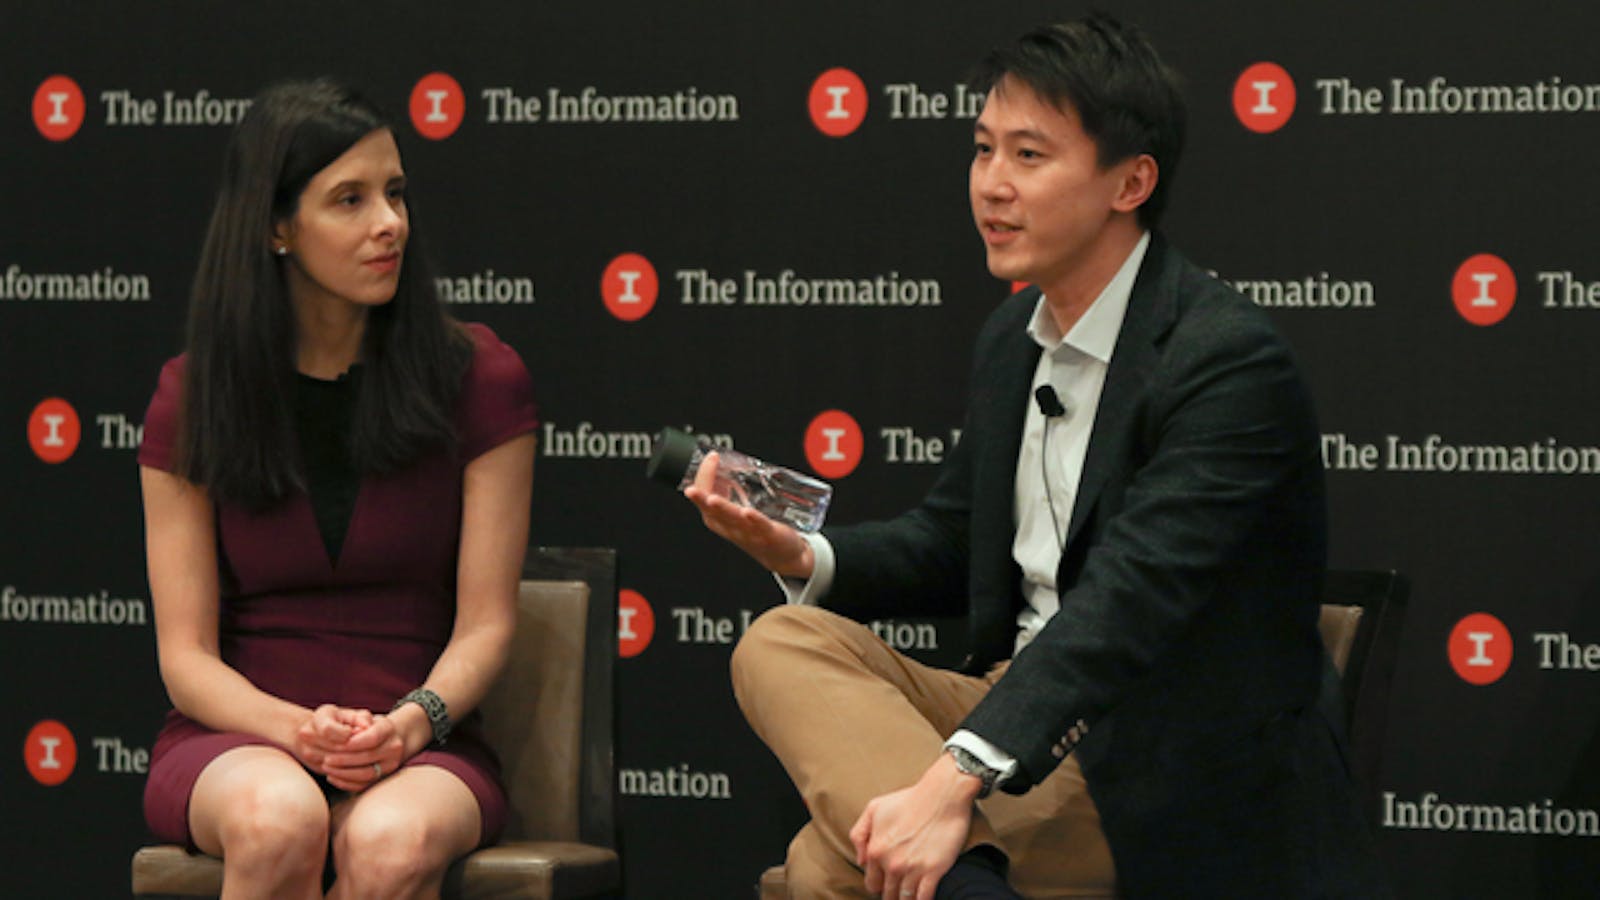 The Information's editor in chief Jessica Lessin with Xiaomi CFO Shou Zi Chew. Photo by Derry Ainsworth